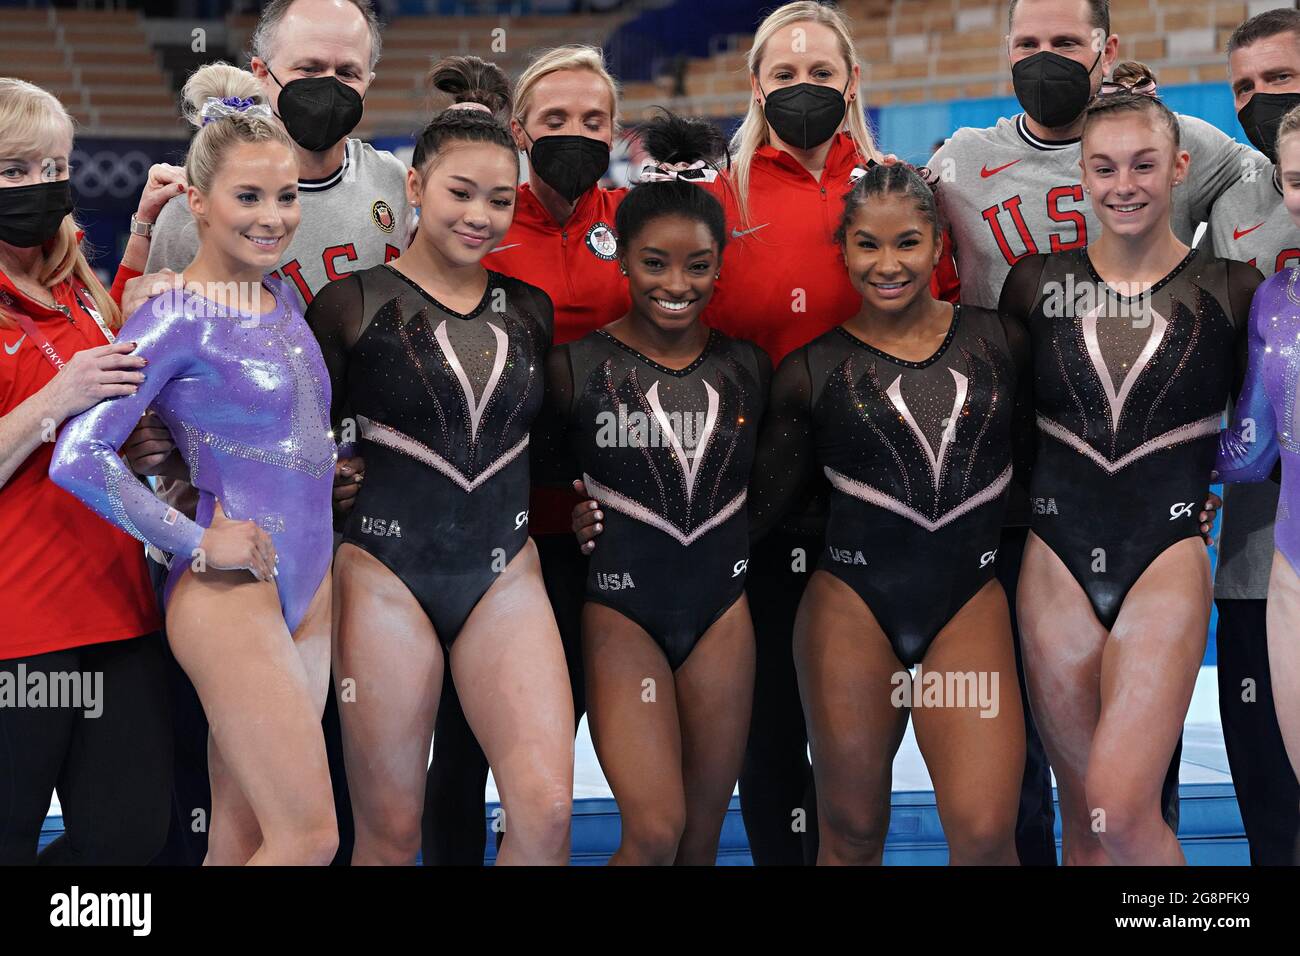 Tokyo, Japan. 22nd July, 2021. United States Artistic Gymnasts Simone Biles, center, poses for a group photo after their practice session at Ariake Gymnastics Centre before the start of the Tokyo Olympic Games in Tokyo, Japan, on Thursday July 22, 2021. Standing from left to right are: Mykayla Skinner, Sunisa Lee, Simone Biles, Jordan Chiles, Grace McCallum and Jade Carey. Photo by Richard Ellis/UPI. Credit: UPI/Alamy Live News Stock Photo